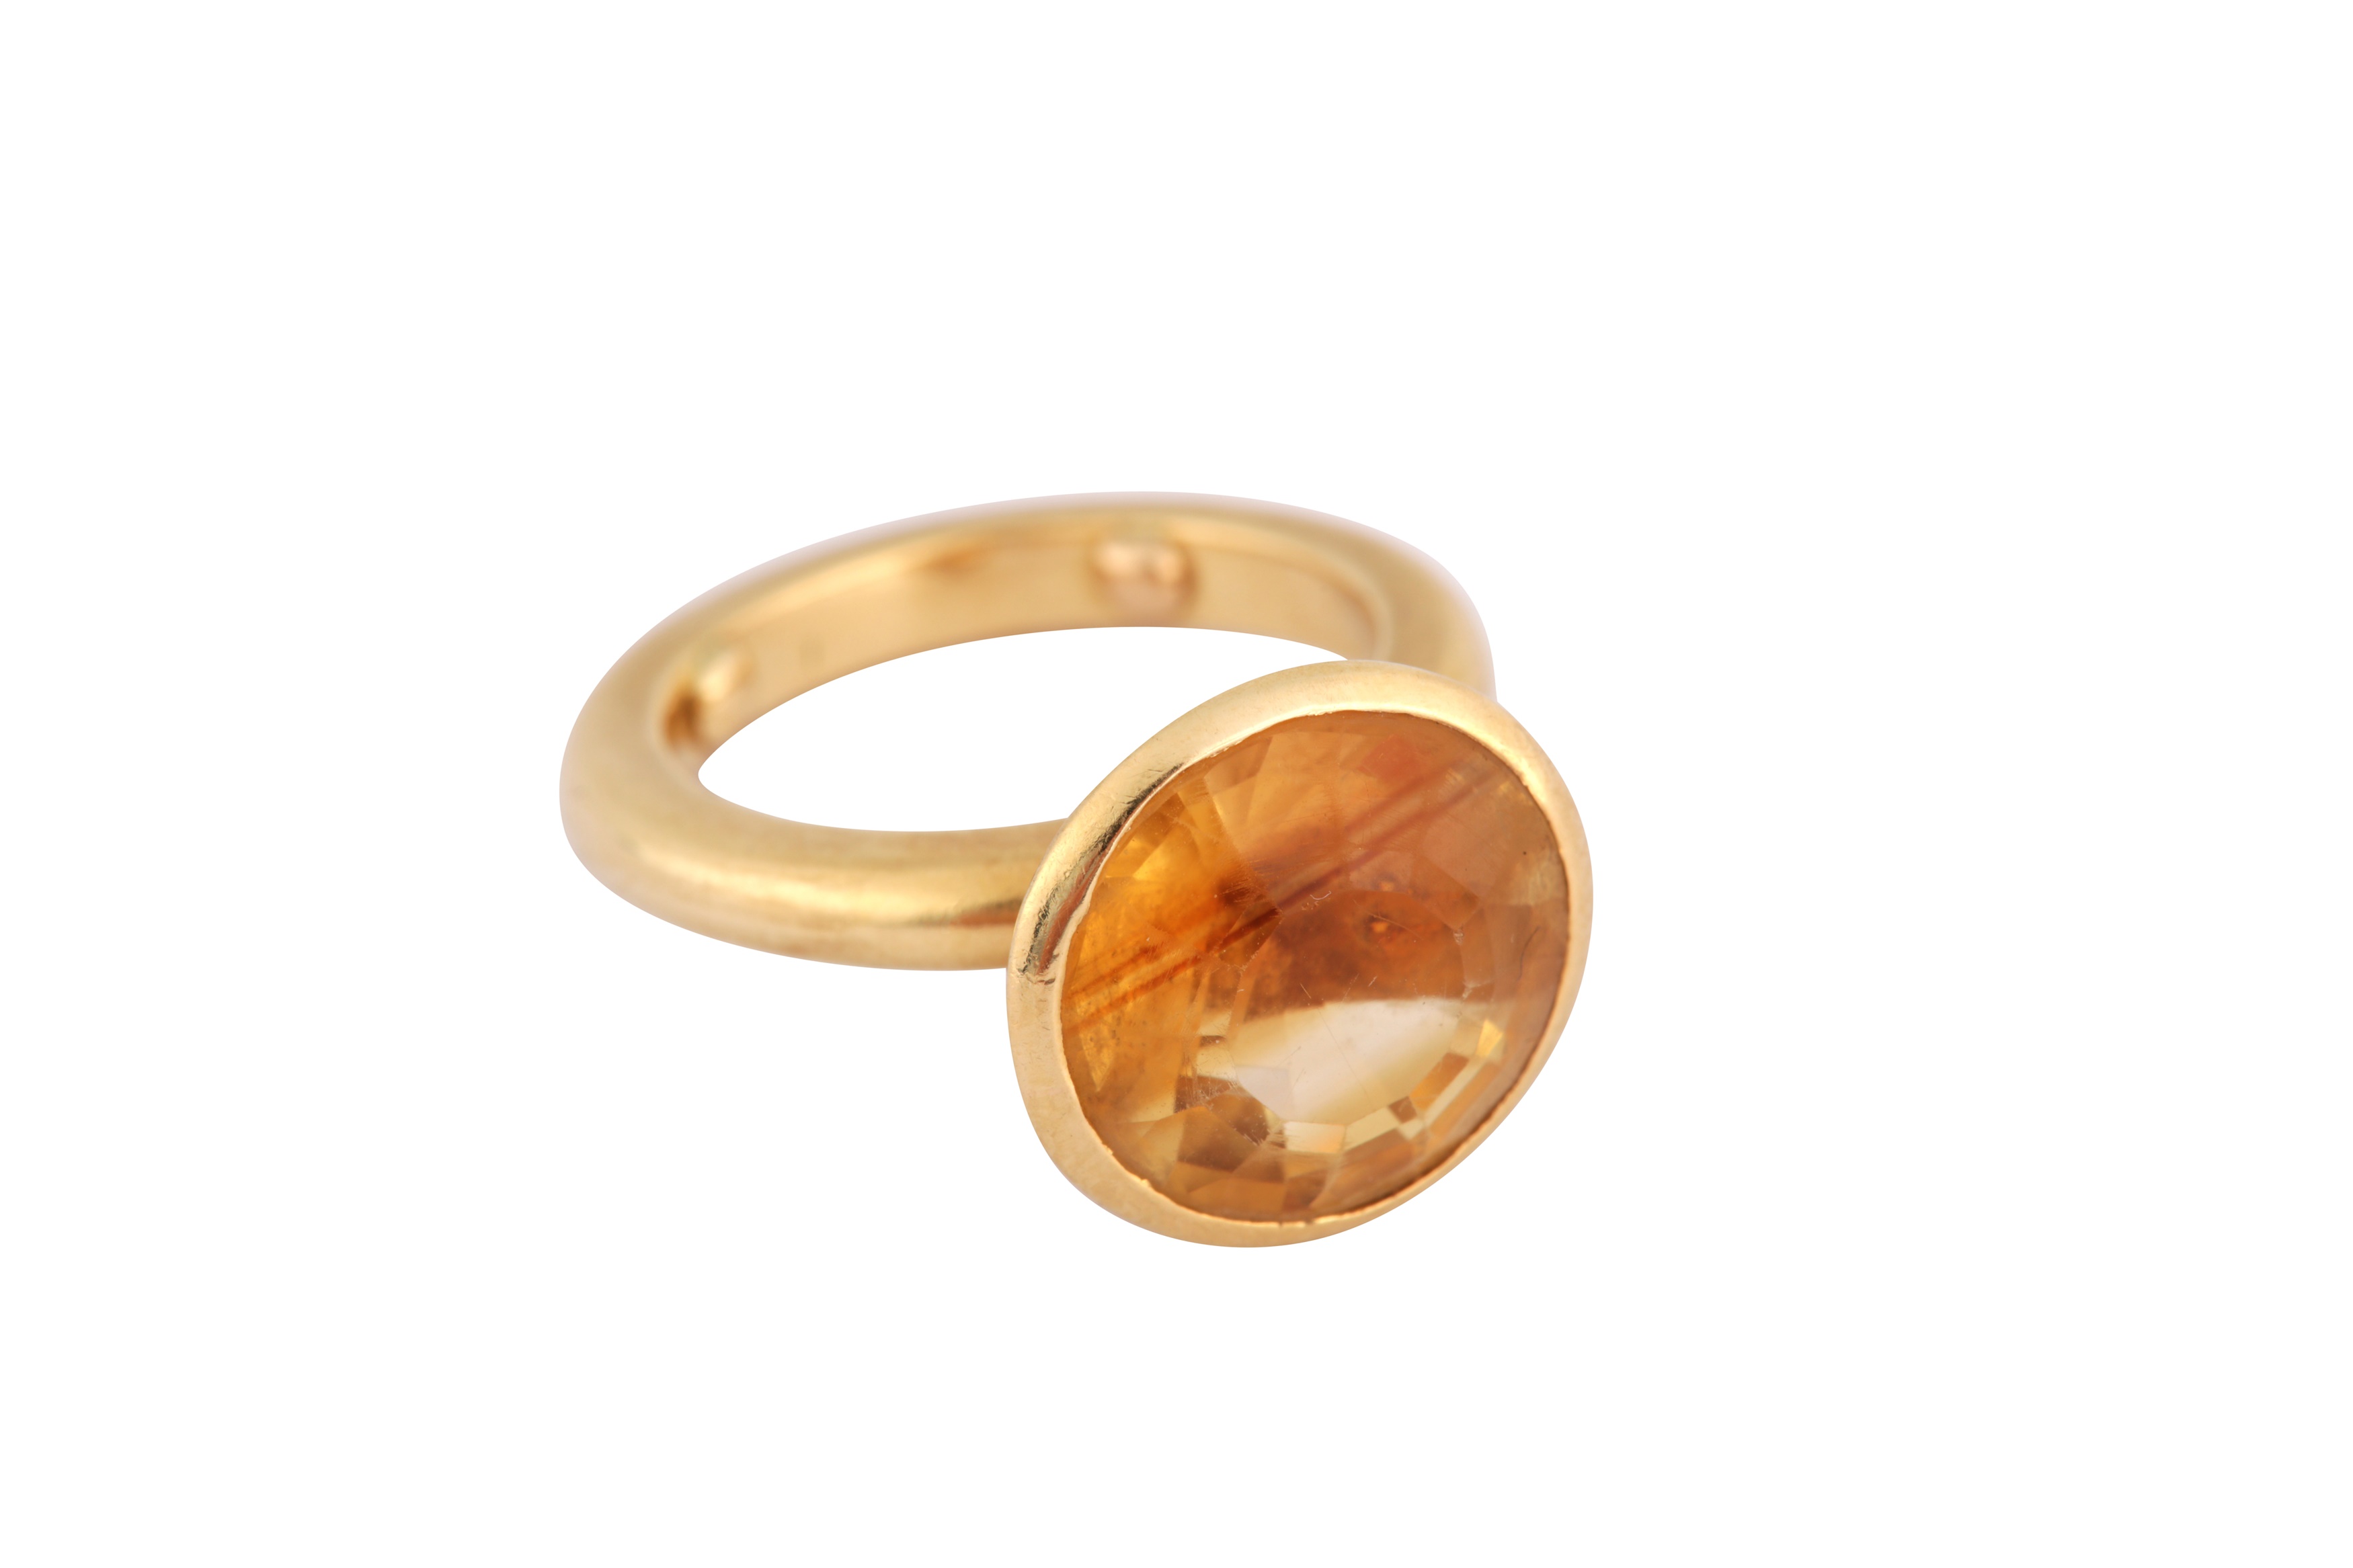 A citrine ring - Image 2 of 4